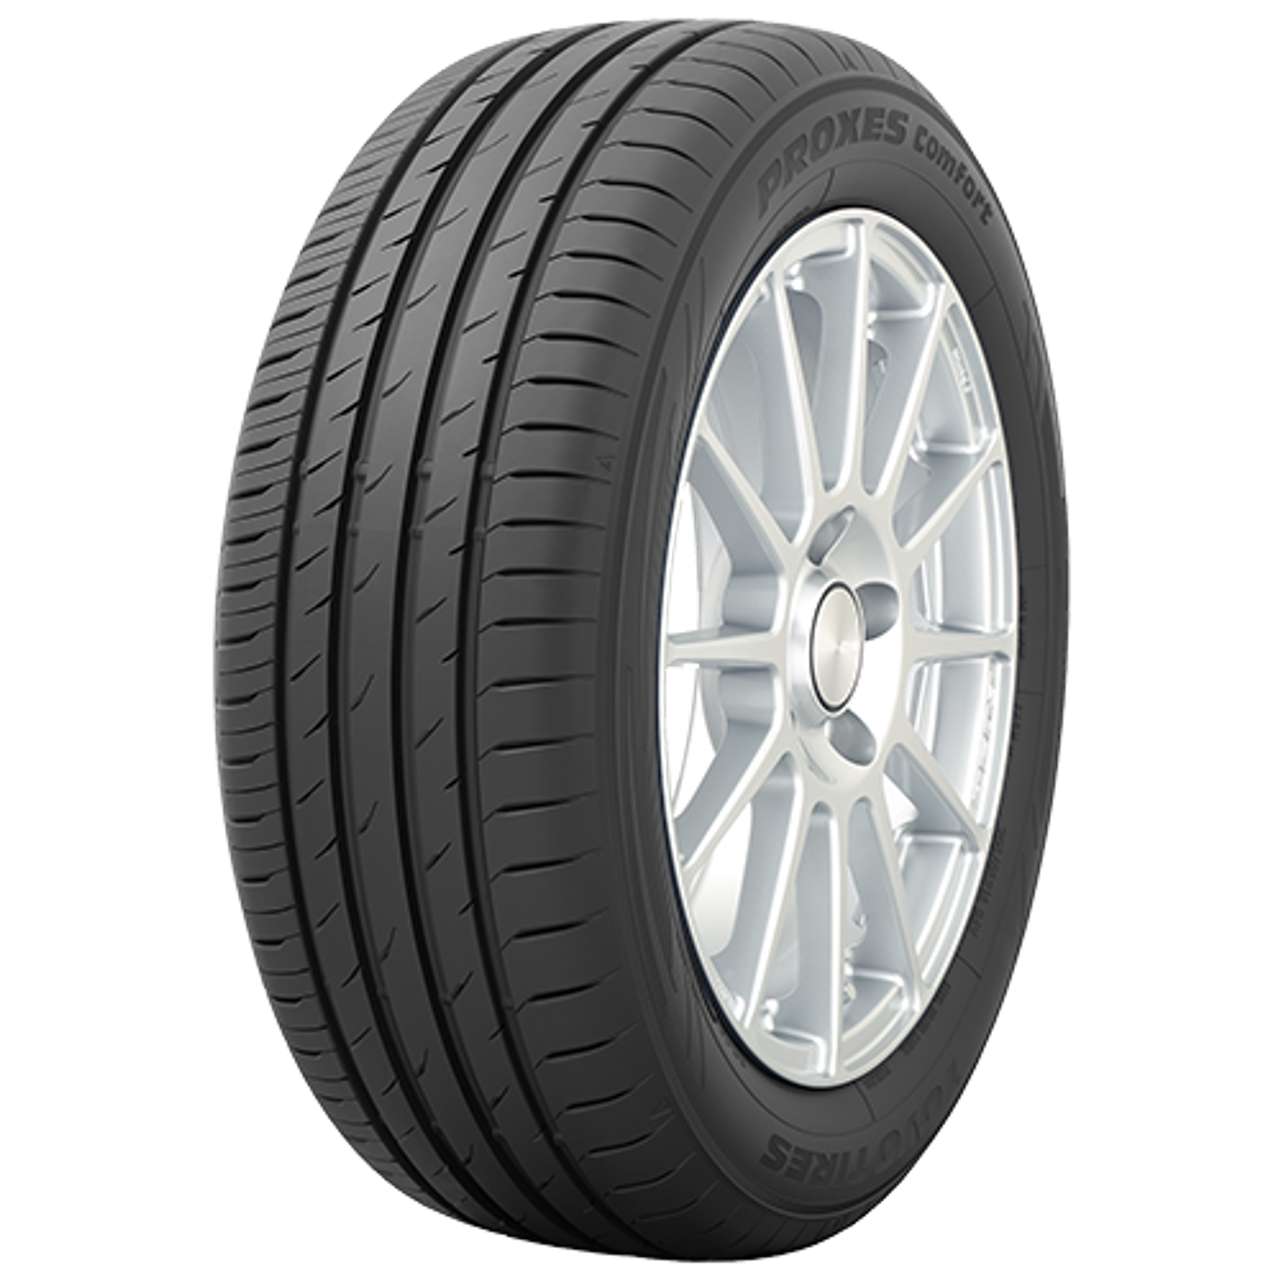 TOYO PROXES COMFORT 195/55R16 91V BSW